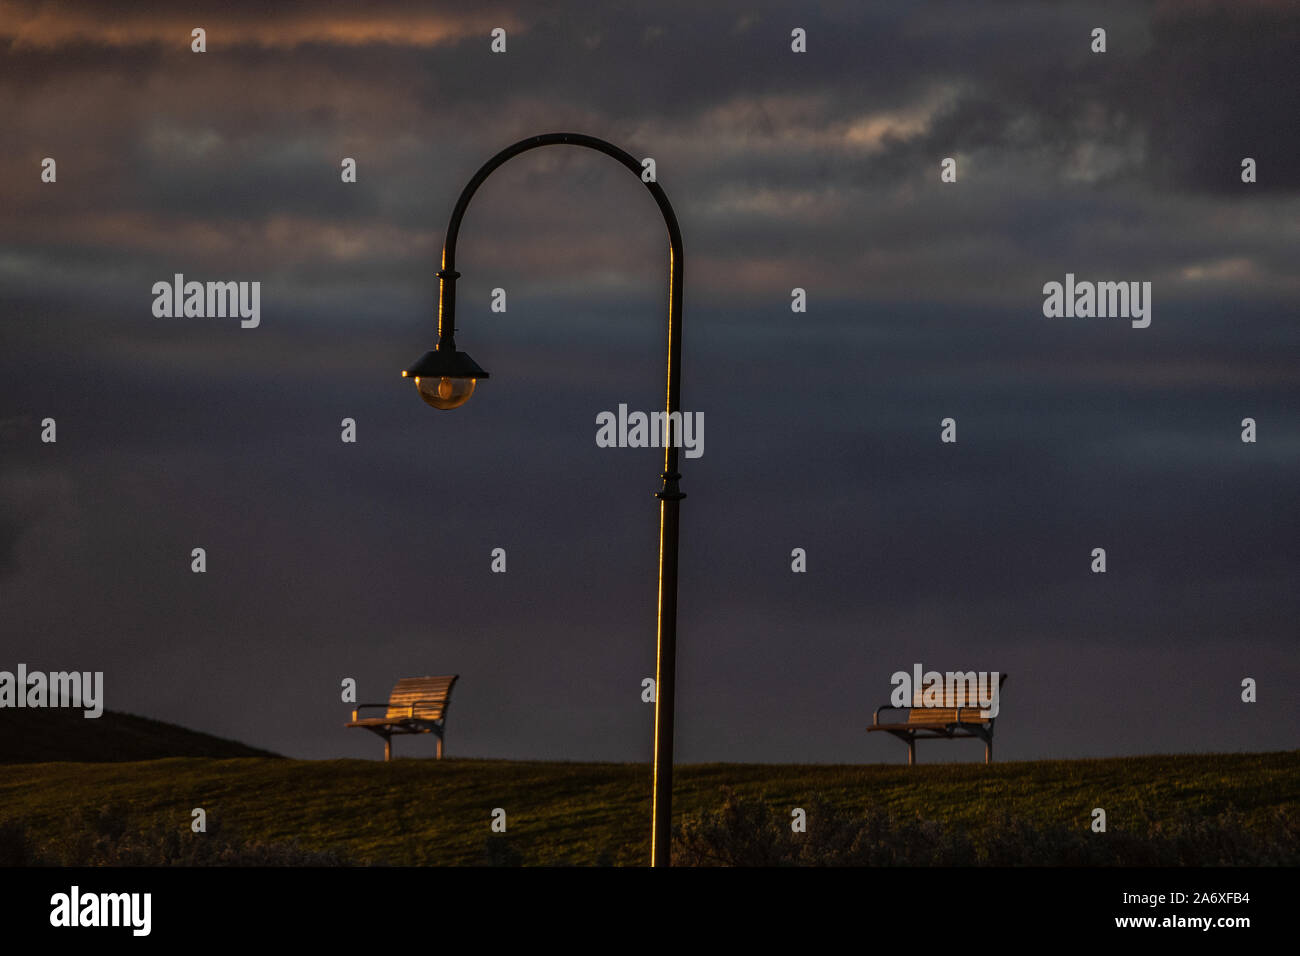 Empty park benches and street lamp in the Melbourne suburb of Elwood. Stock Photo